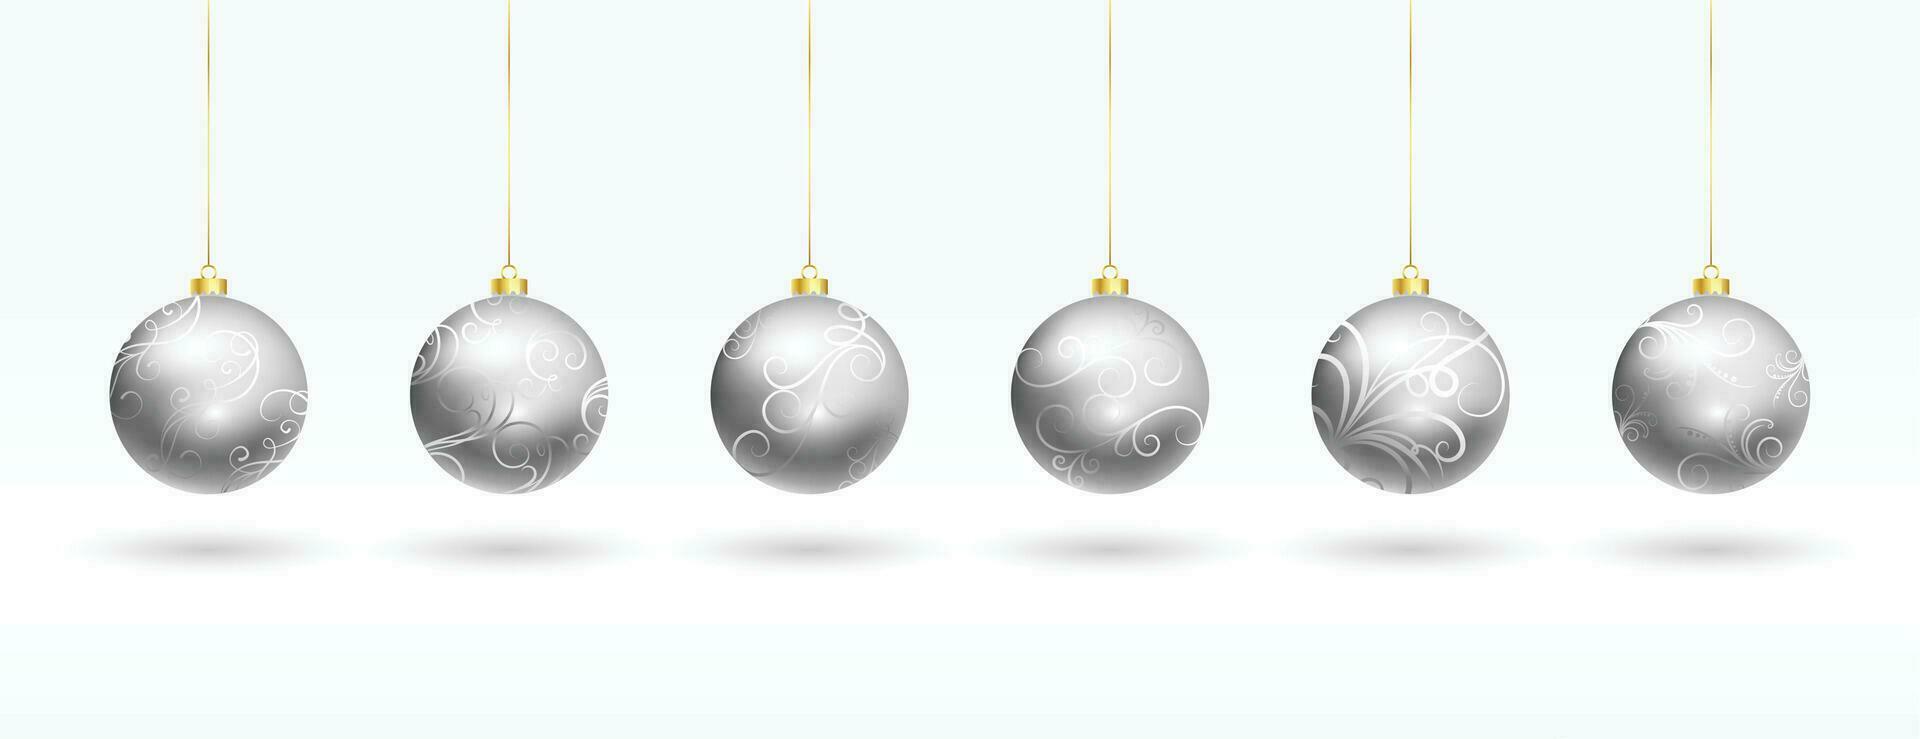 collection of silver christmas bauble symbols design vector